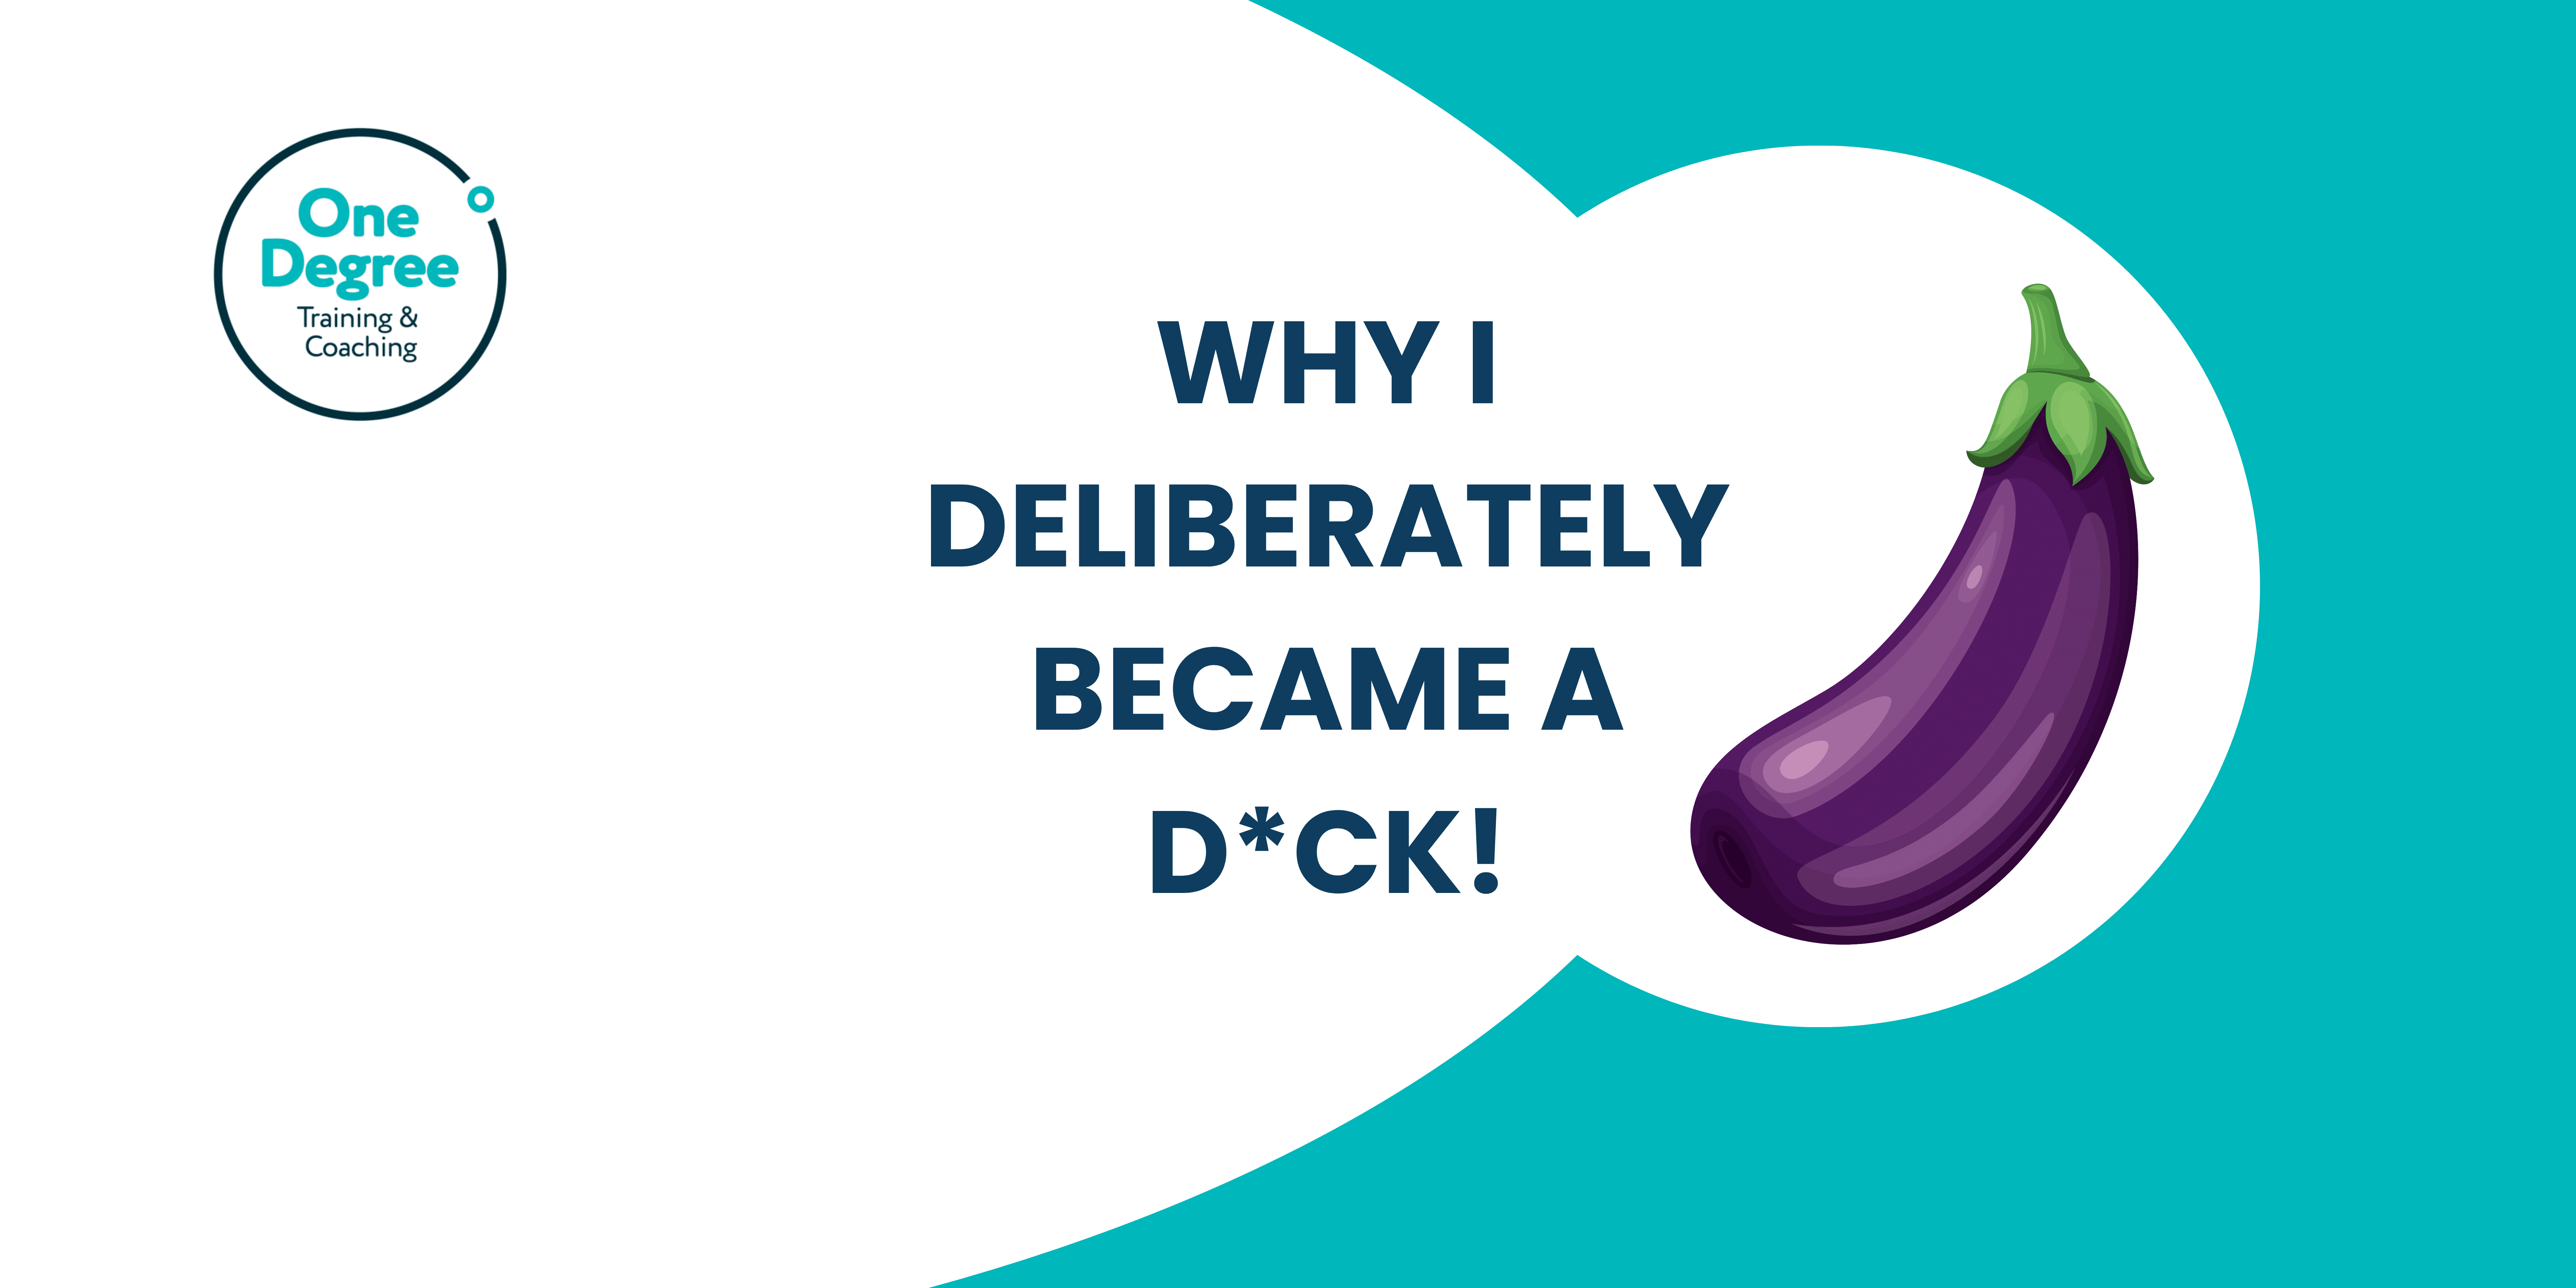 Why I deliberately became a “dick” in the workplace.